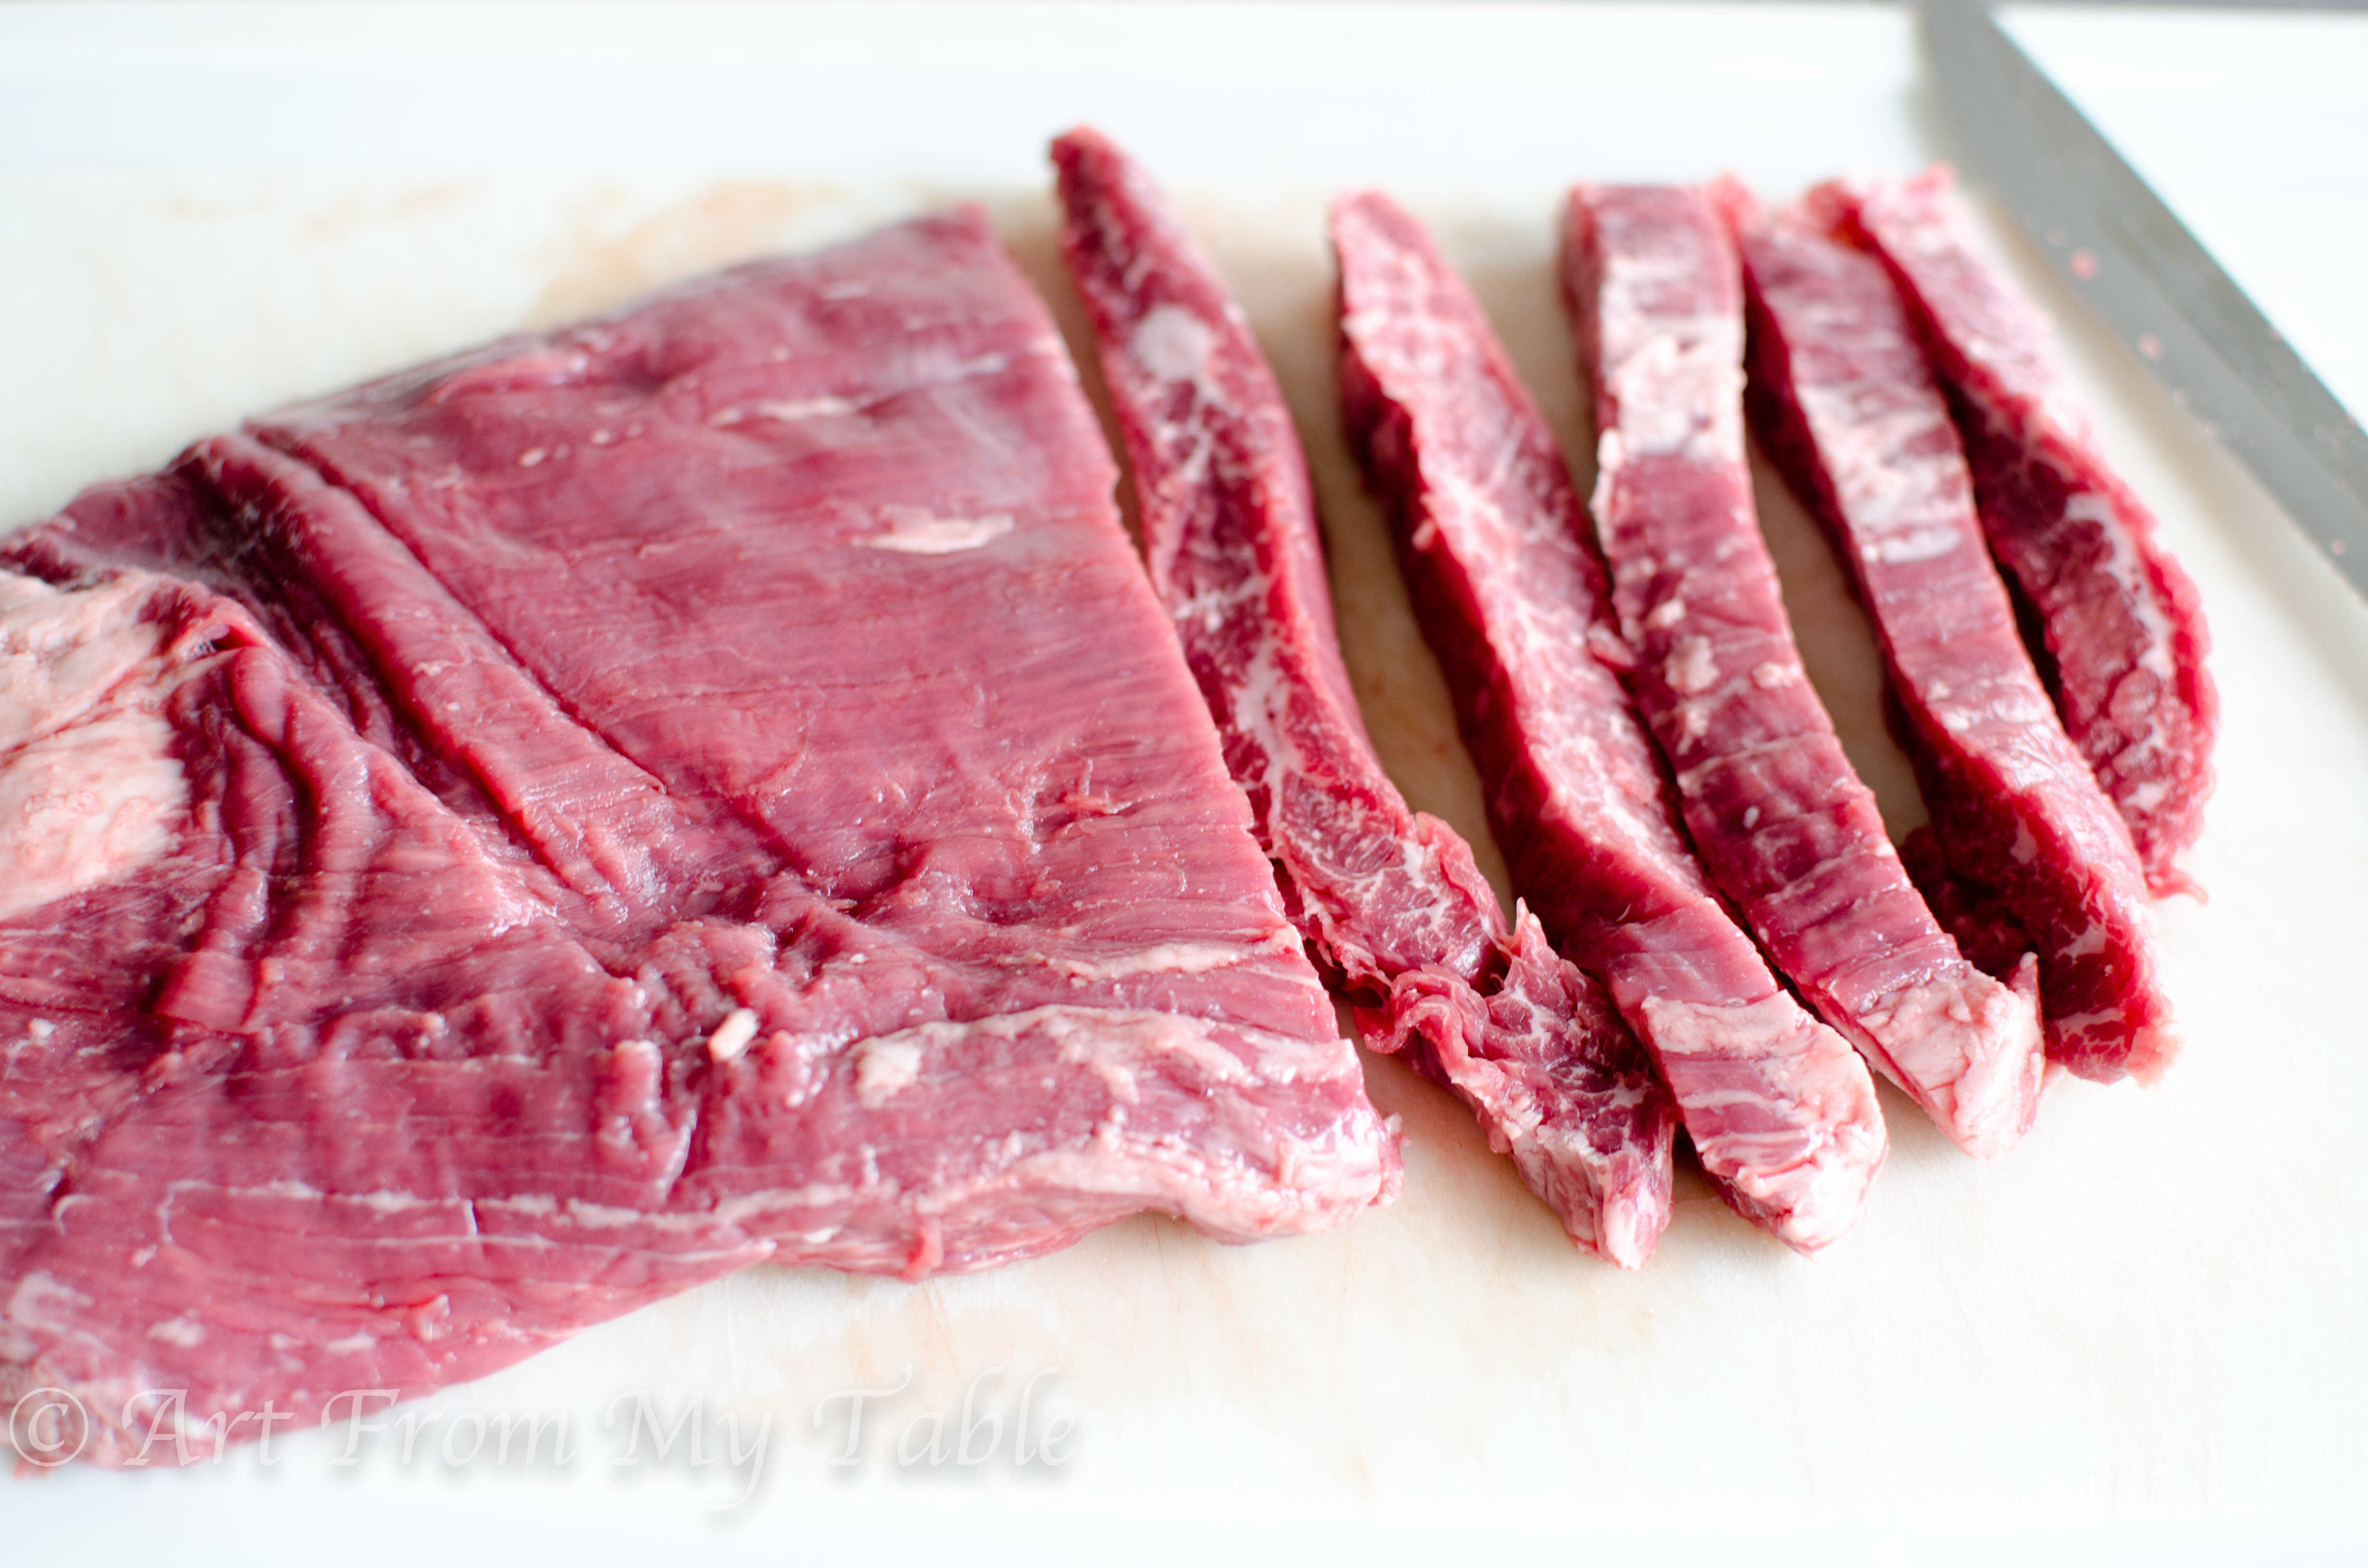 Raw flank steak, partially sliced into 1/2 inch slices. 